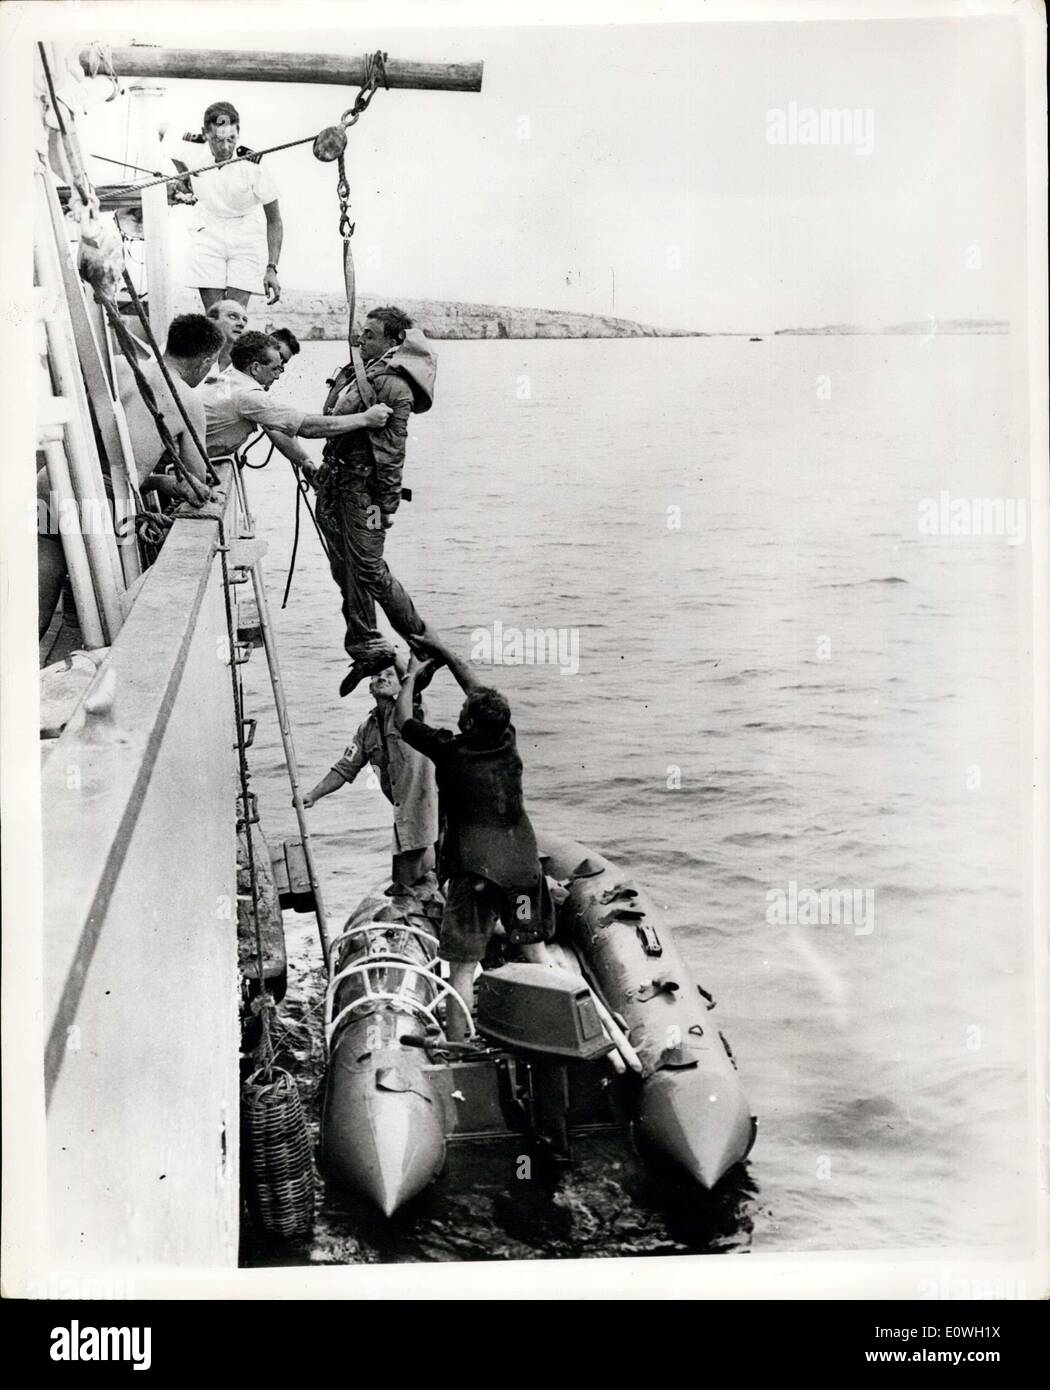 Oct. 04, 1962 - Navy Men Escape From Submarine In Experiment Royal Navy men escaped from the submarine Tiptoe lying 260 feet down on the Mediterranean seabed and made history for the Navy: no R.N. man has ever survived an ascent to the surface from more than 150 feet before. the team experimenting with new escape methods is from the submarine escape training school at Gosport, Hants. Photo Shows:- Seconds after surfacing Petty Officer Leonard Stokes is hoisted to the deck of a ship for a physical check. Stock Photo